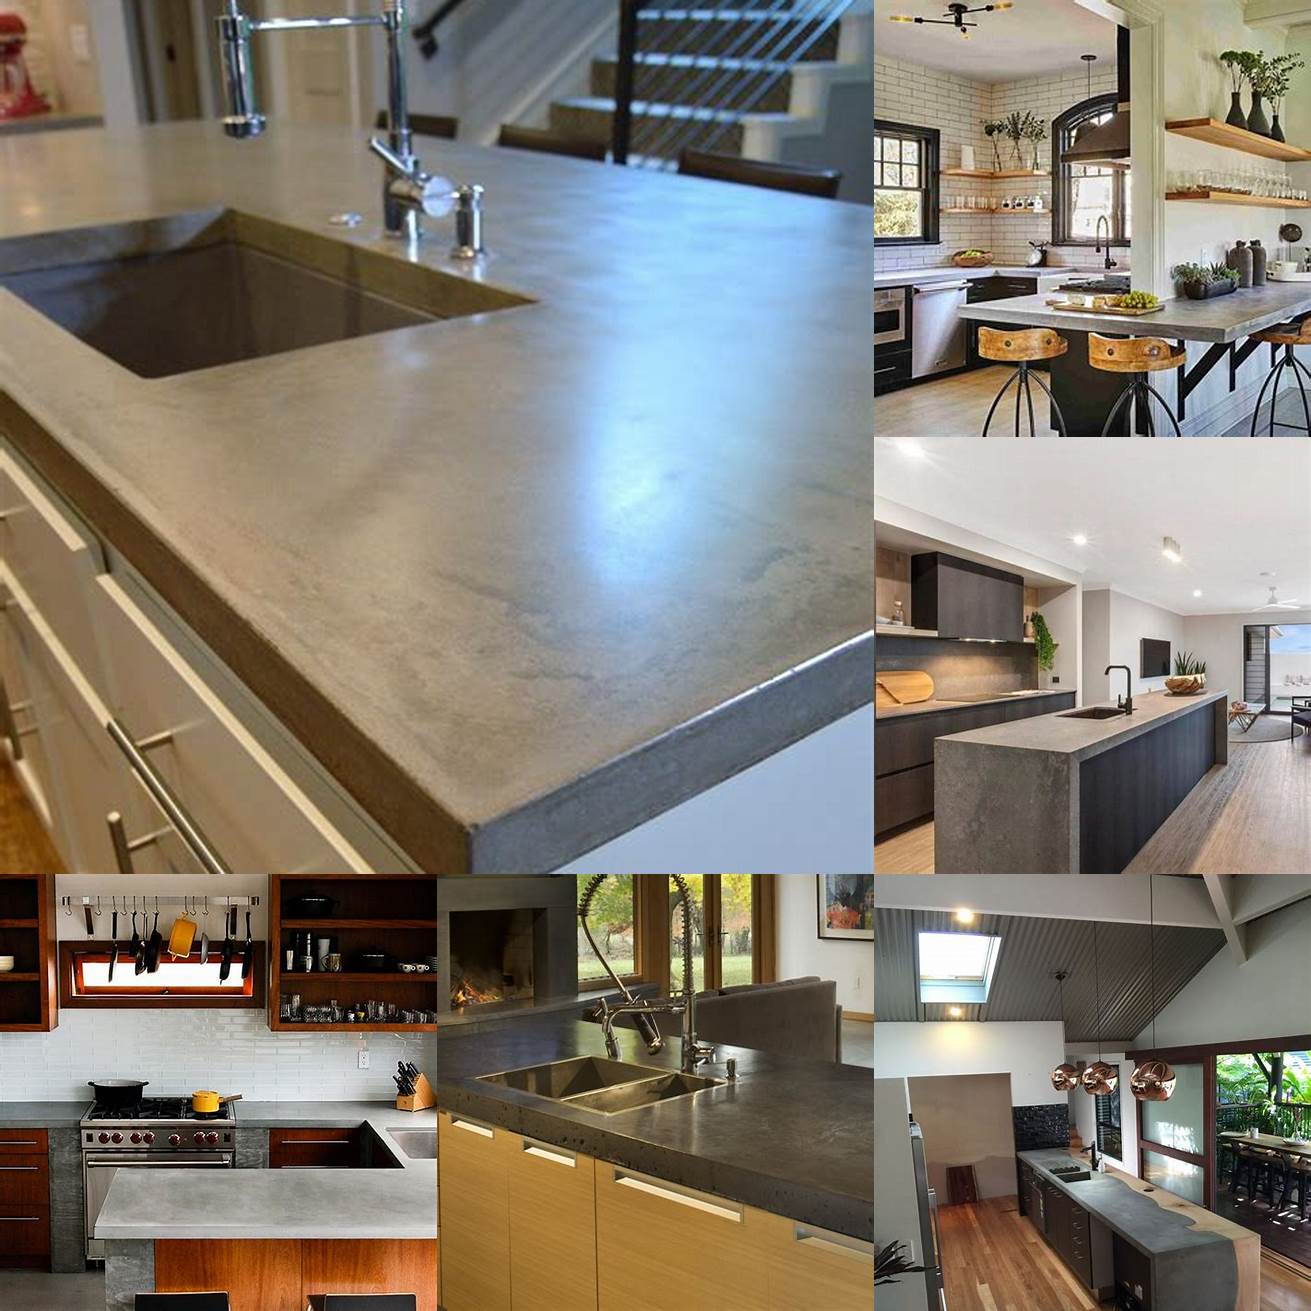 Concrete countertops add an industrial touch to your kitchen